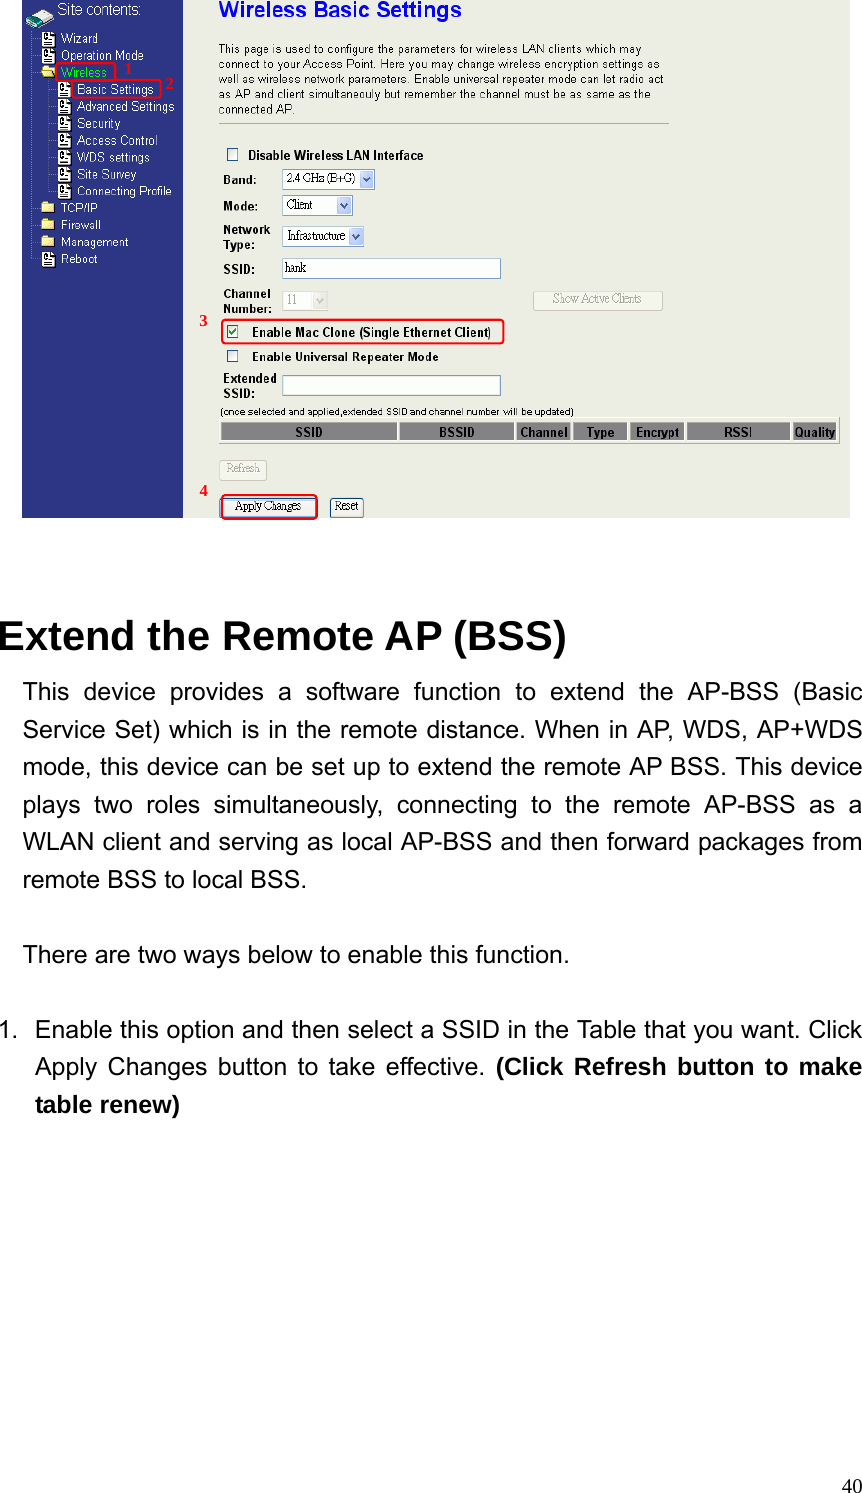  40   Extend the Remote AP (BSS) This device provides a software function to extend the AP-BSS (Basic Service Set) which is in the remote distance. When in AP, WDS, AP+WDS mode, this device can be set up to extend the remote AP BSS. This device plays two roles simultaneously, connecting to the remote AP-BSS as a WLAN client and serving as local AP-BSS and then forward packages from remote BSS to local BSS.  There are two ways below to enable this function.  1.  Enable this option and then select a SSID in the Table that you want. Click Apply Changes button to take effective. (Click Refresh button to make table renew) 1  2 3 4 